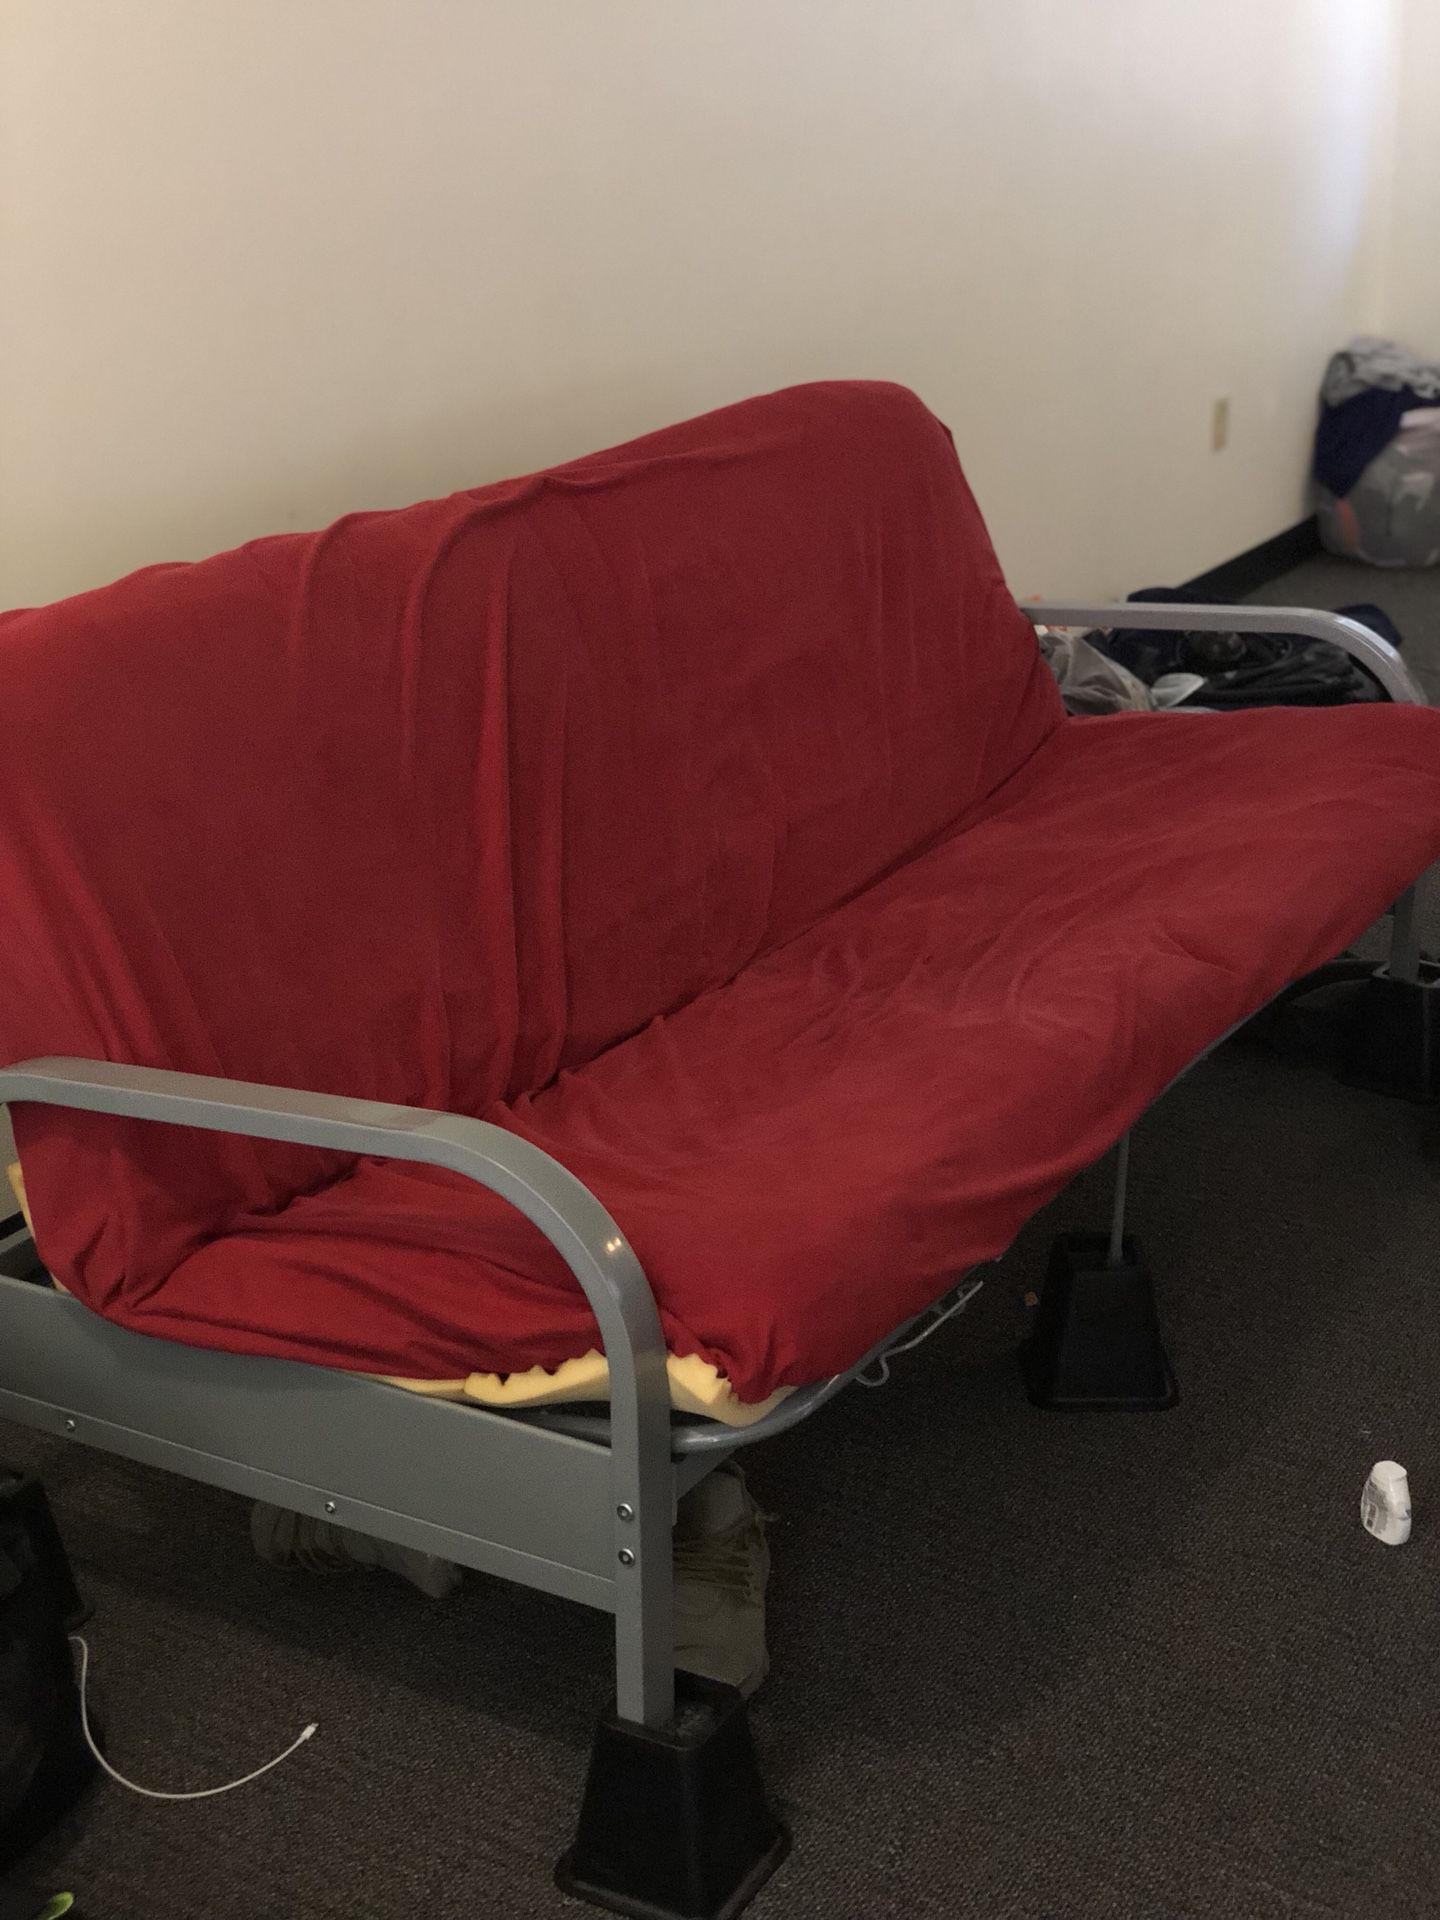 Futon for sale! Great condition, need gone ASAP I’m graduating college and need it gone by 5/11/18... I will negotiate